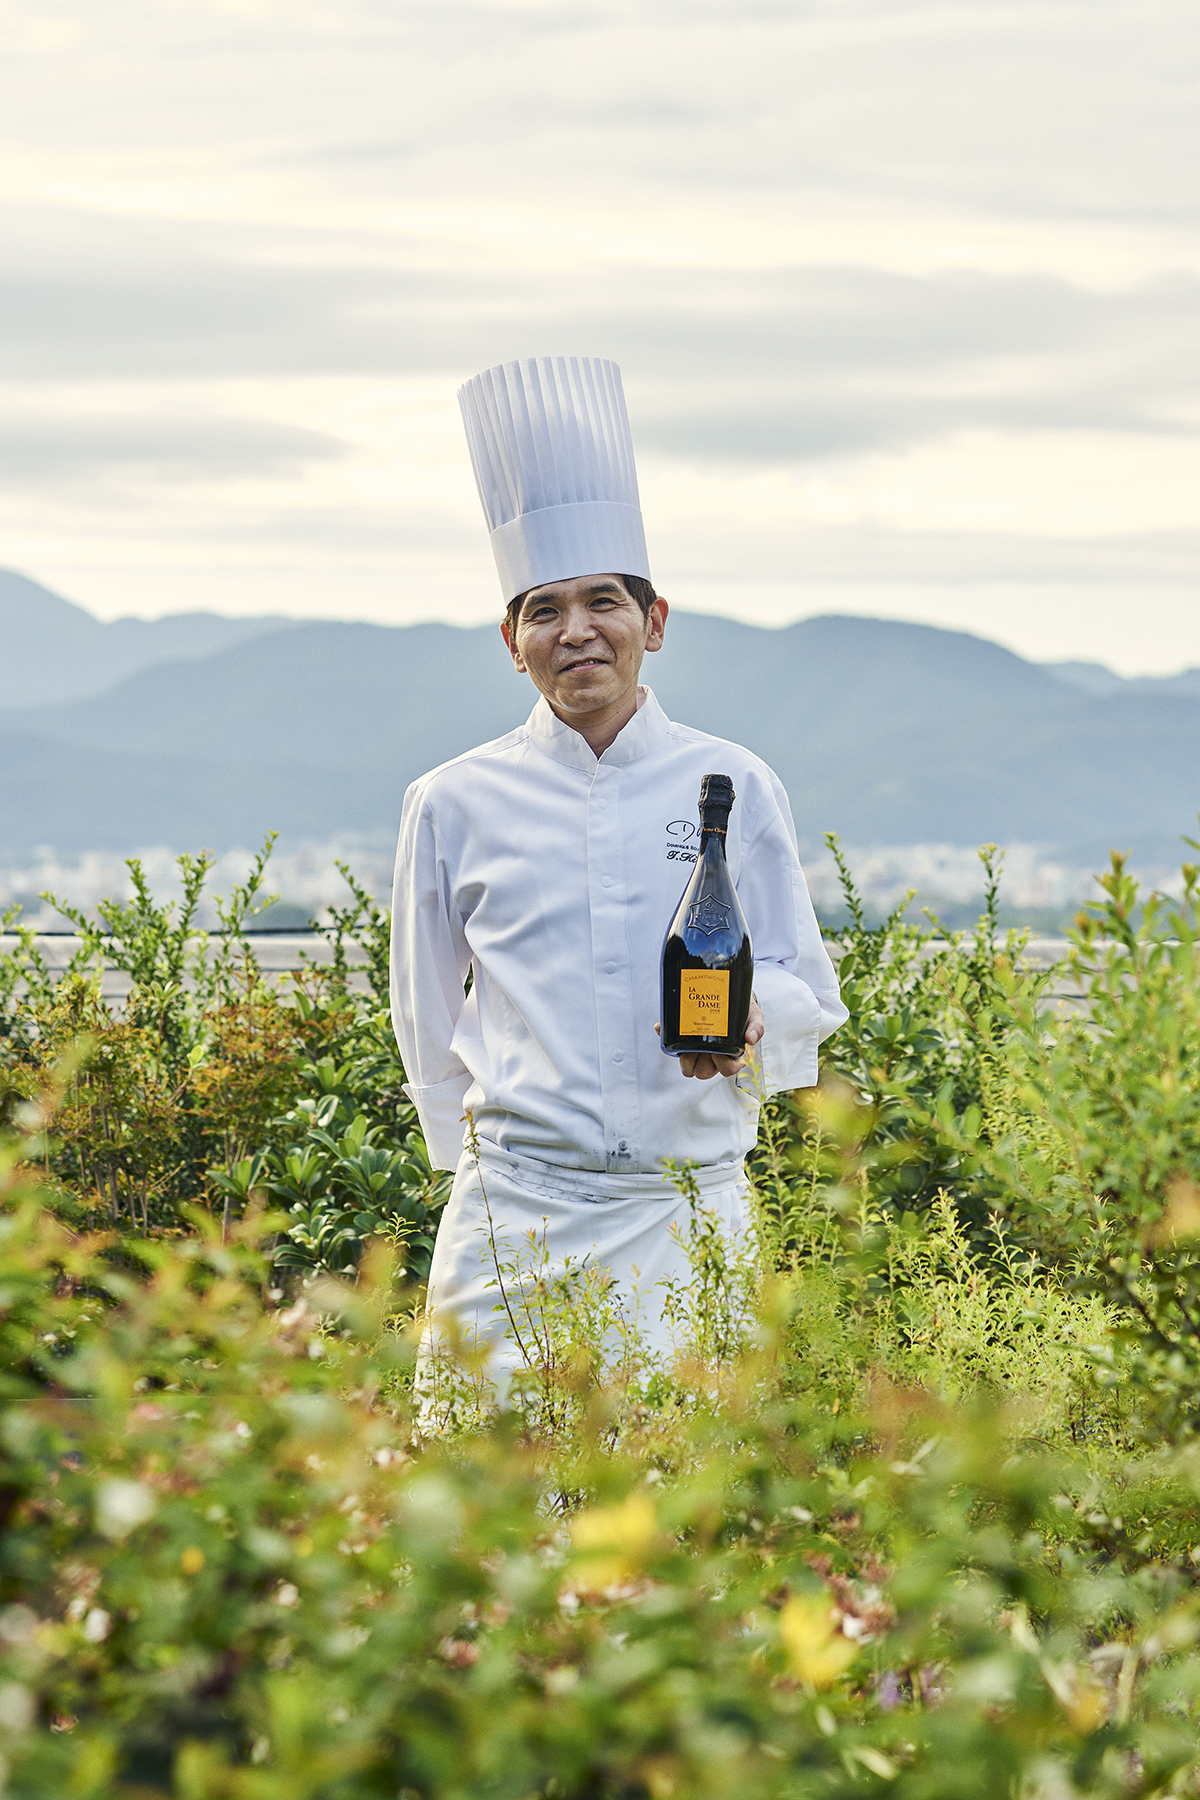 A chef wearing a long white hat and uniform holding a bottle of champagne in a field